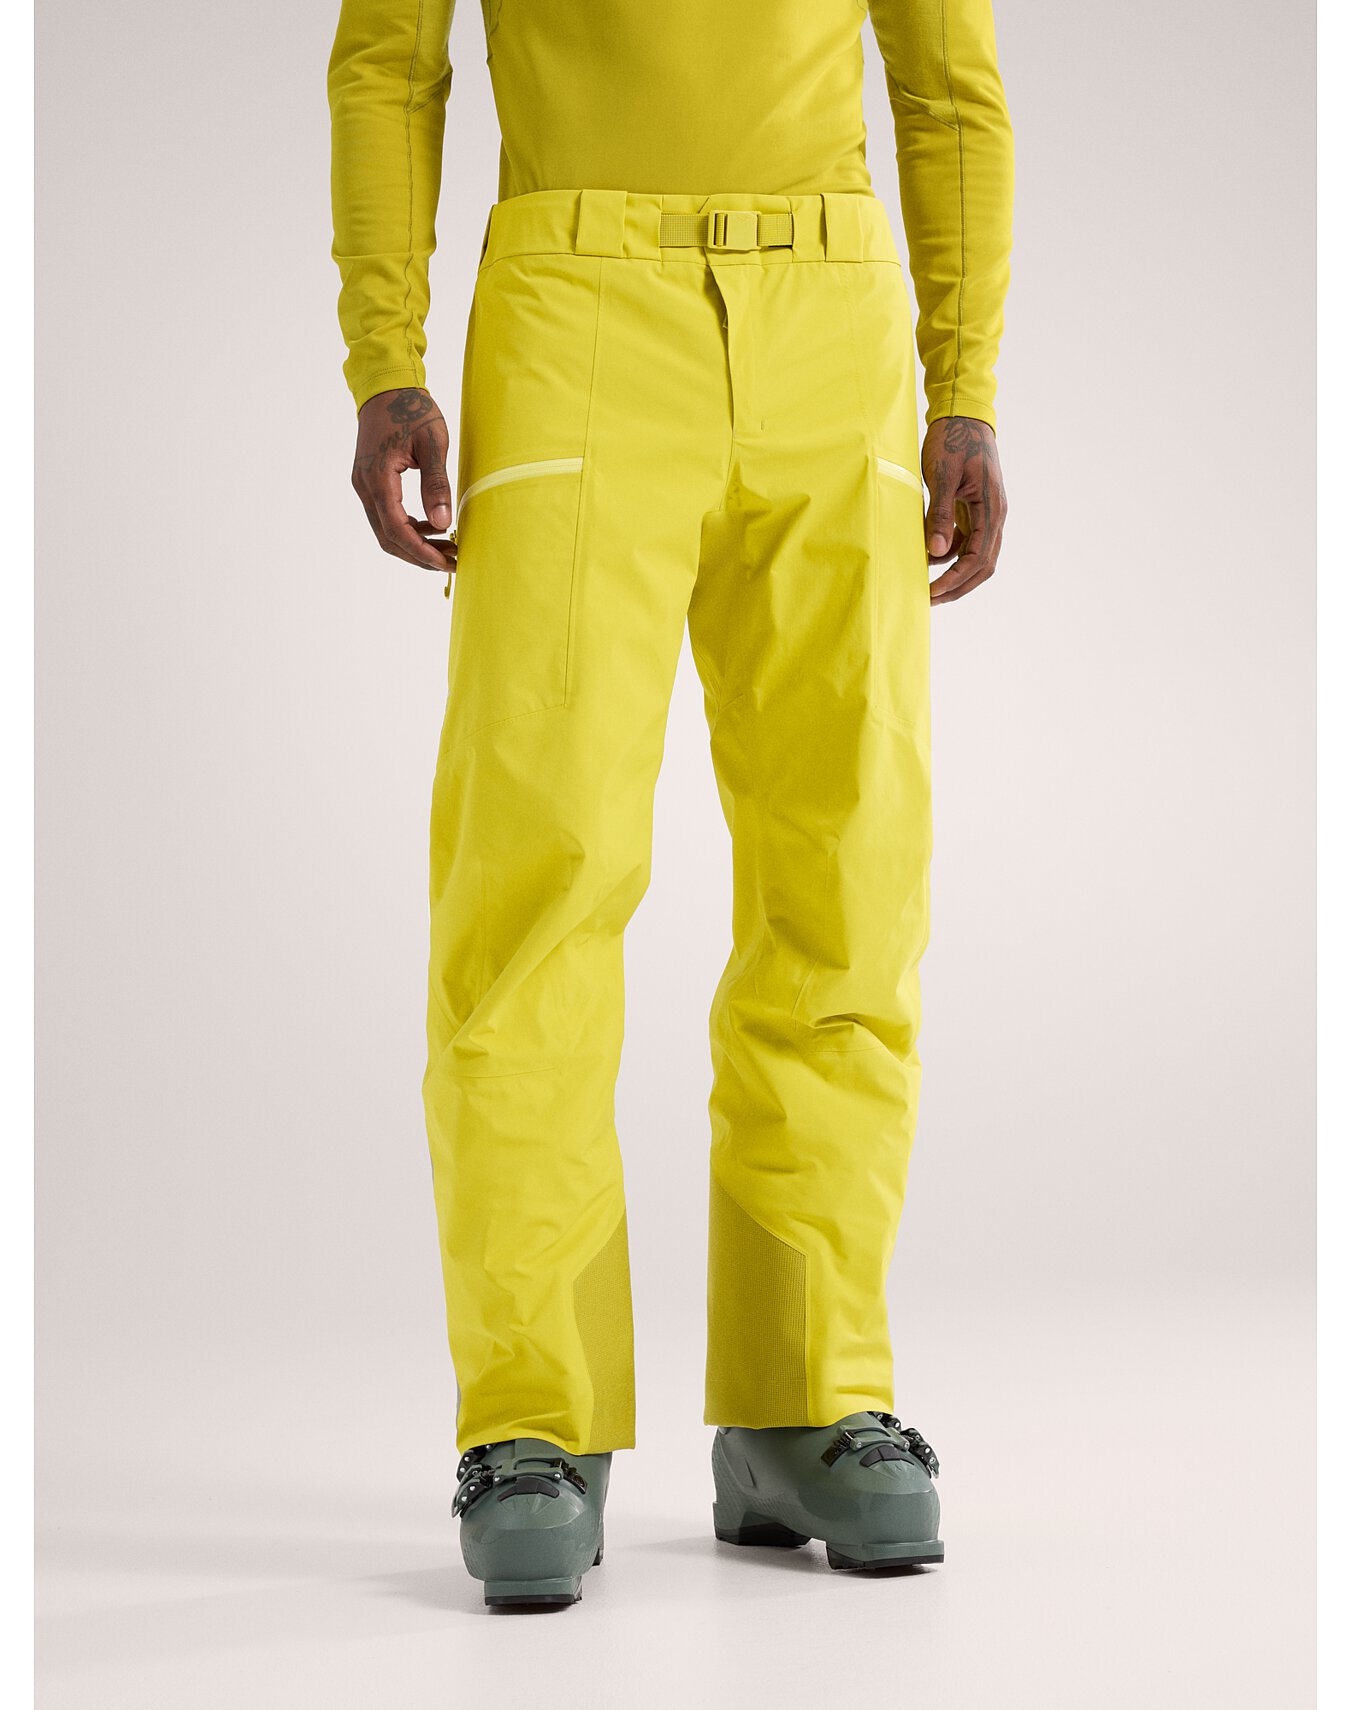 Sabre Insulated Pant Men's | Arc'teryx Outlet